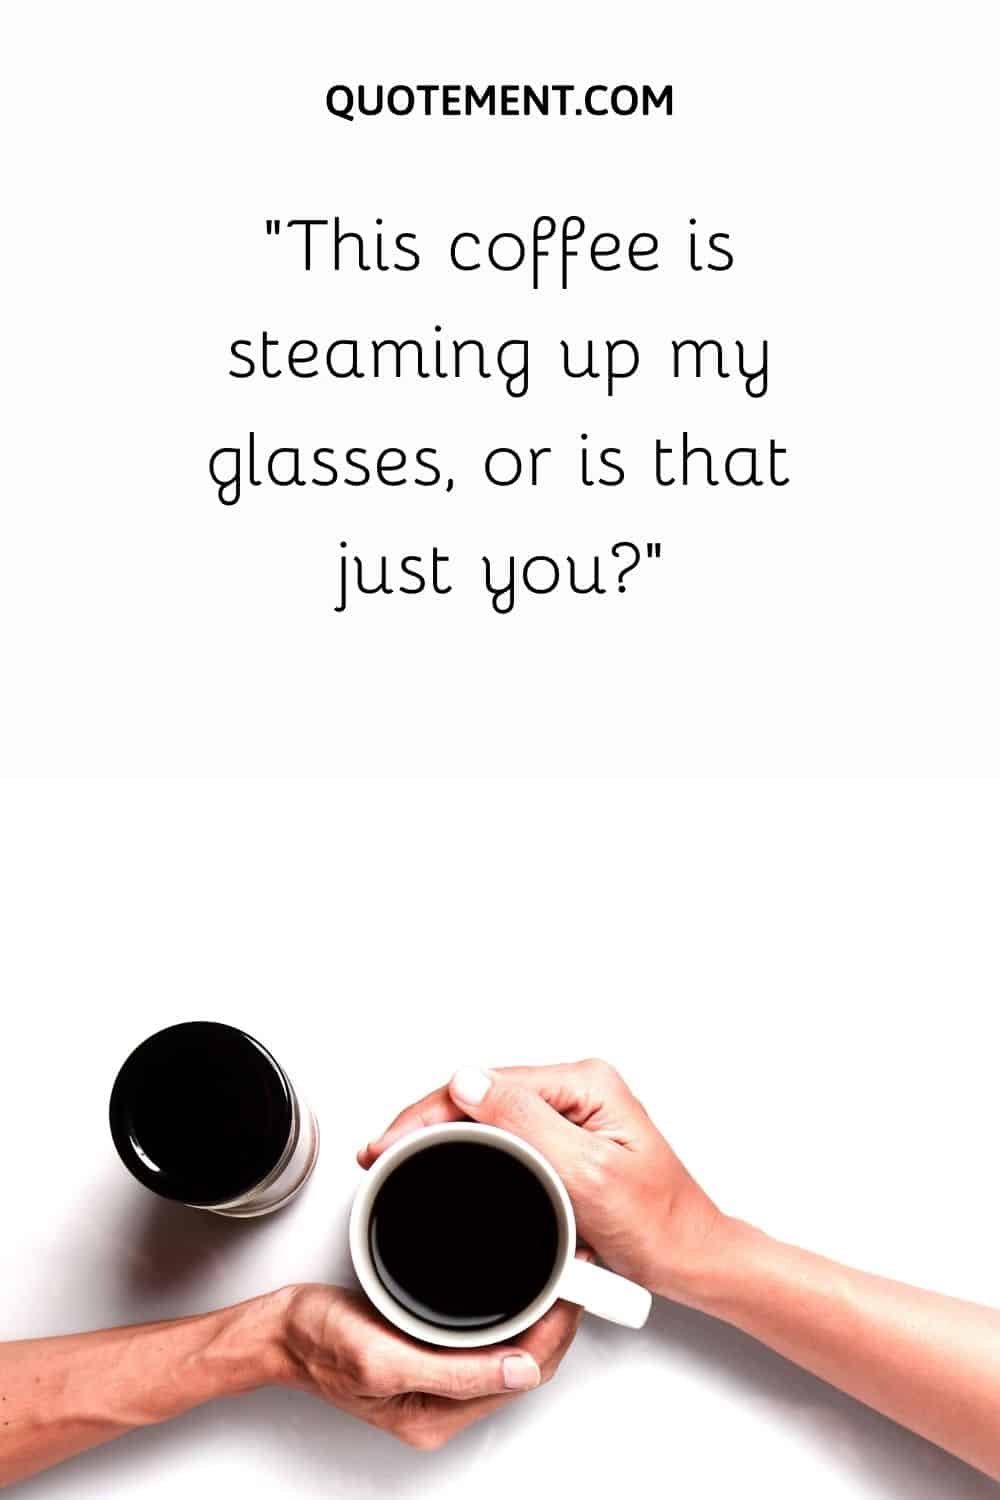 This coffee is steaming up my glasses, or is that just you